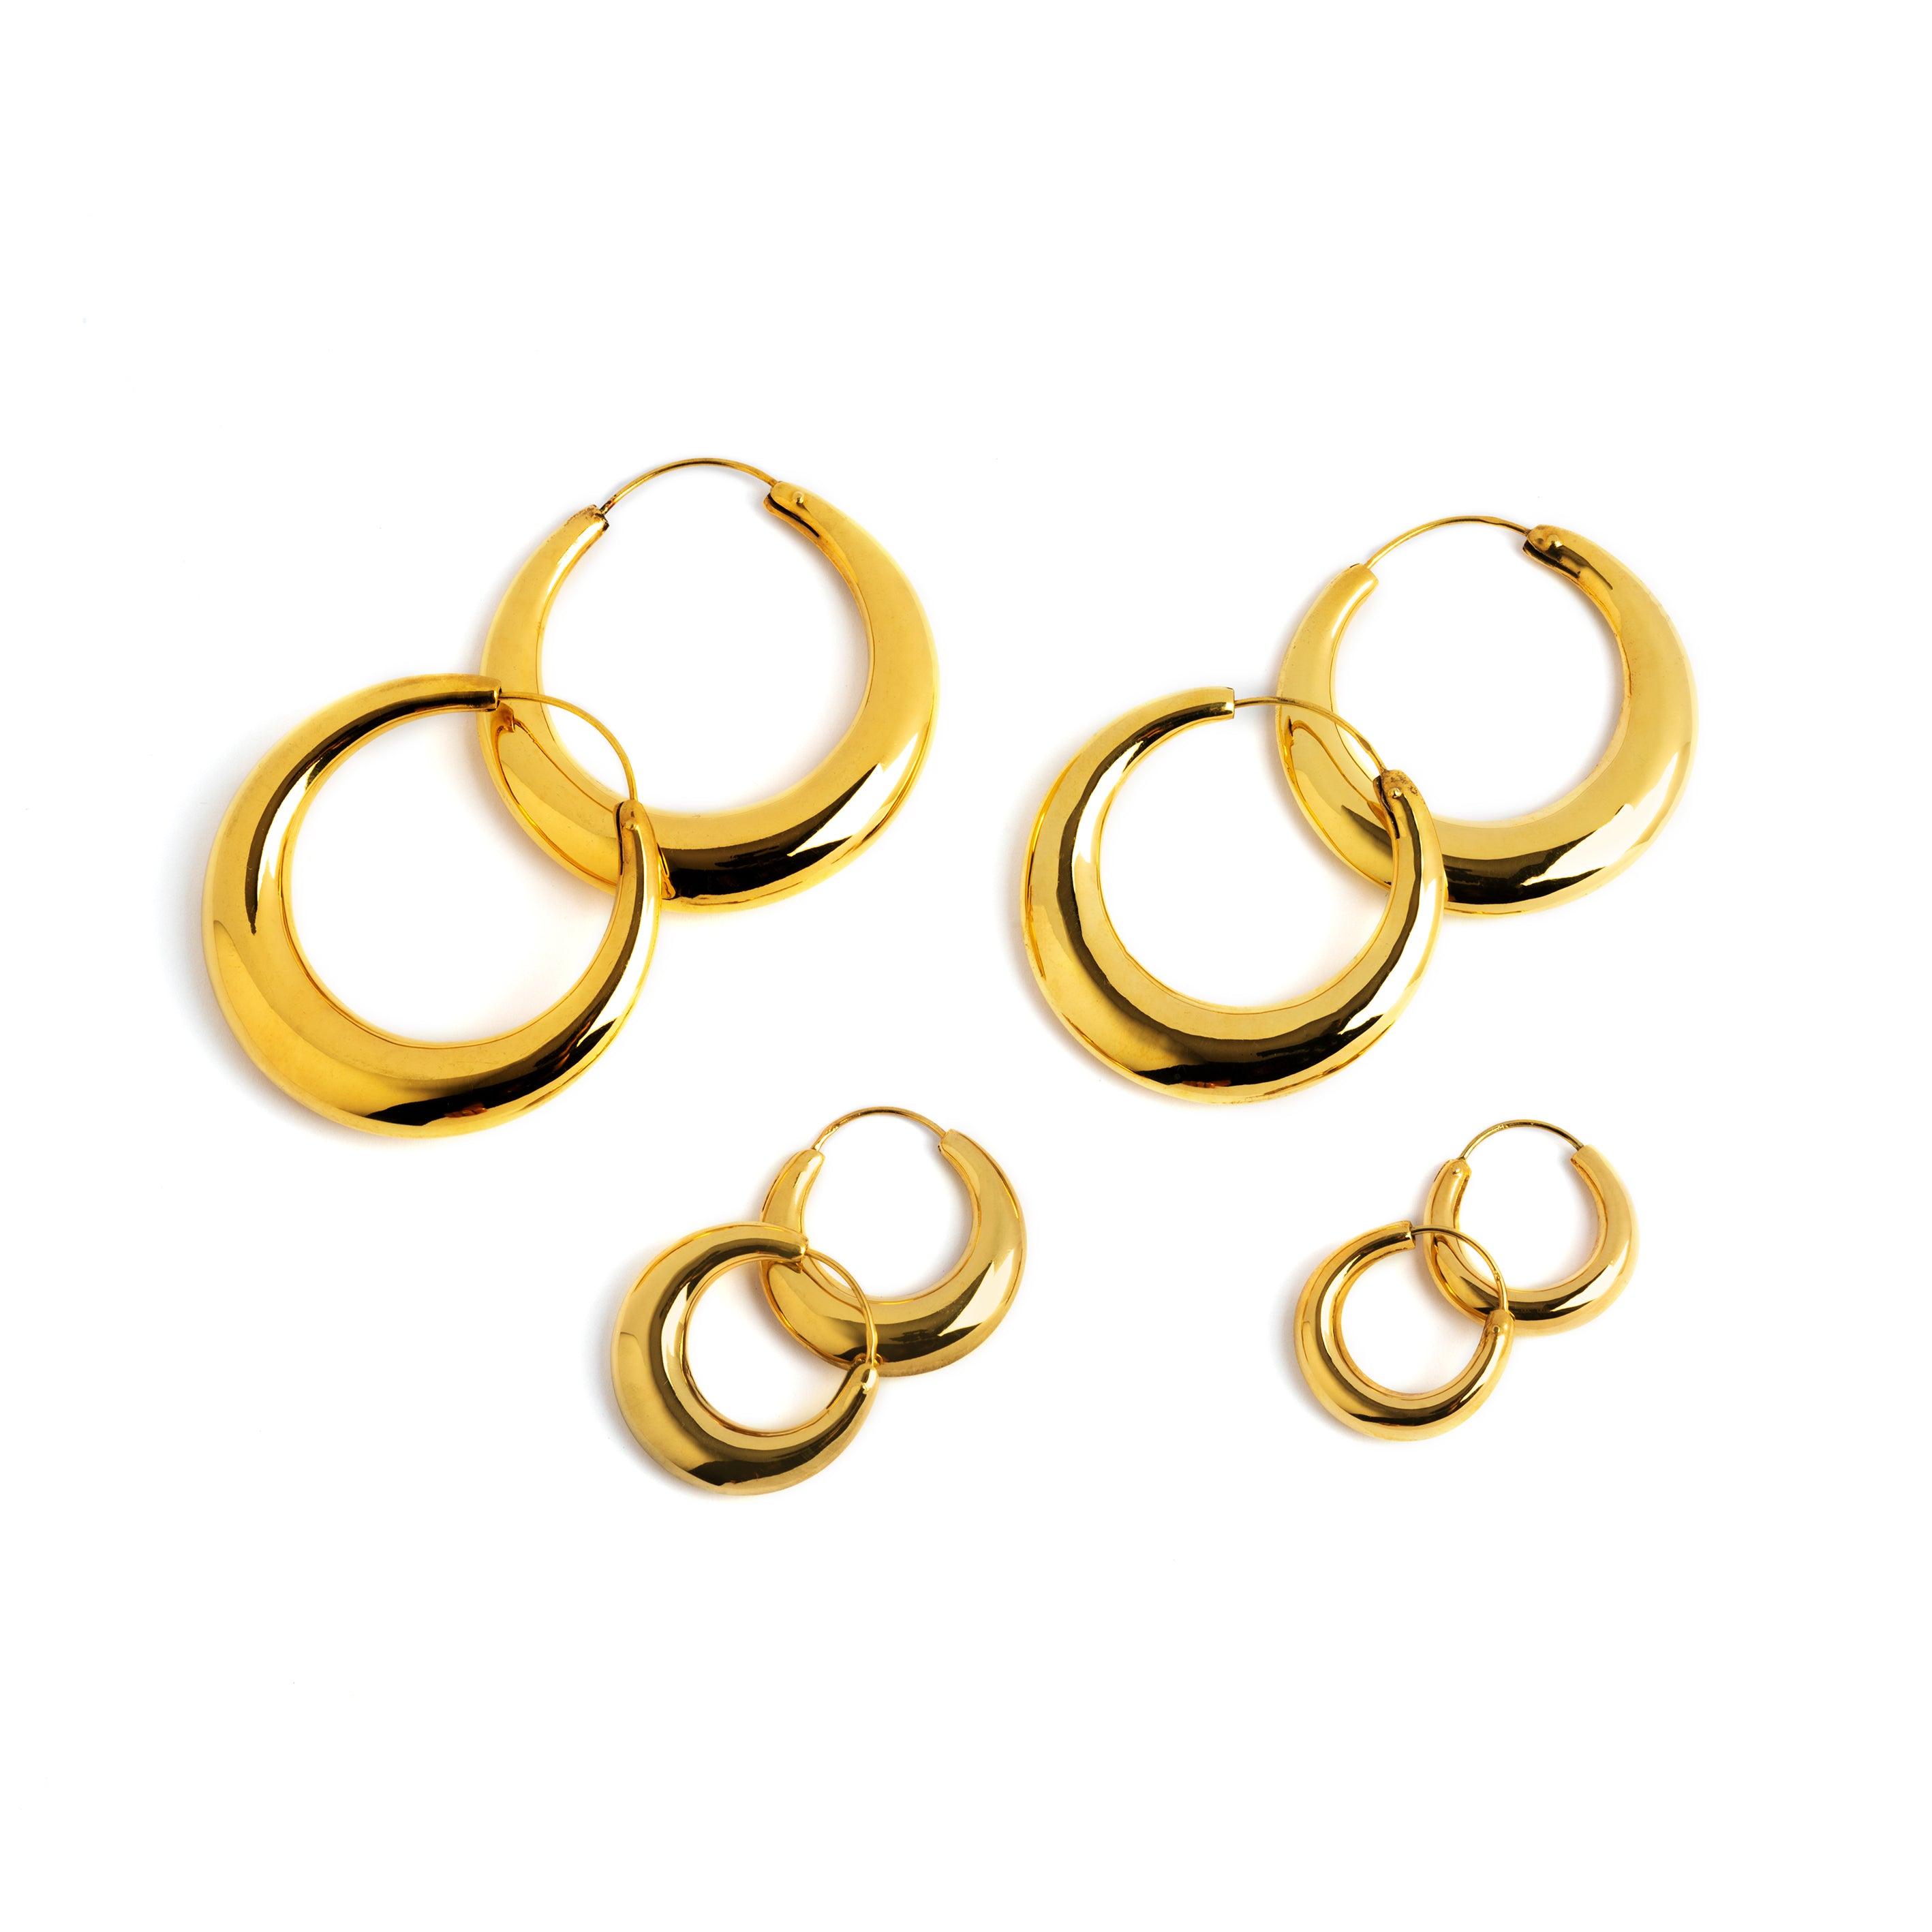 Different sizes of Golden Glow Hoop Earrings frontal view